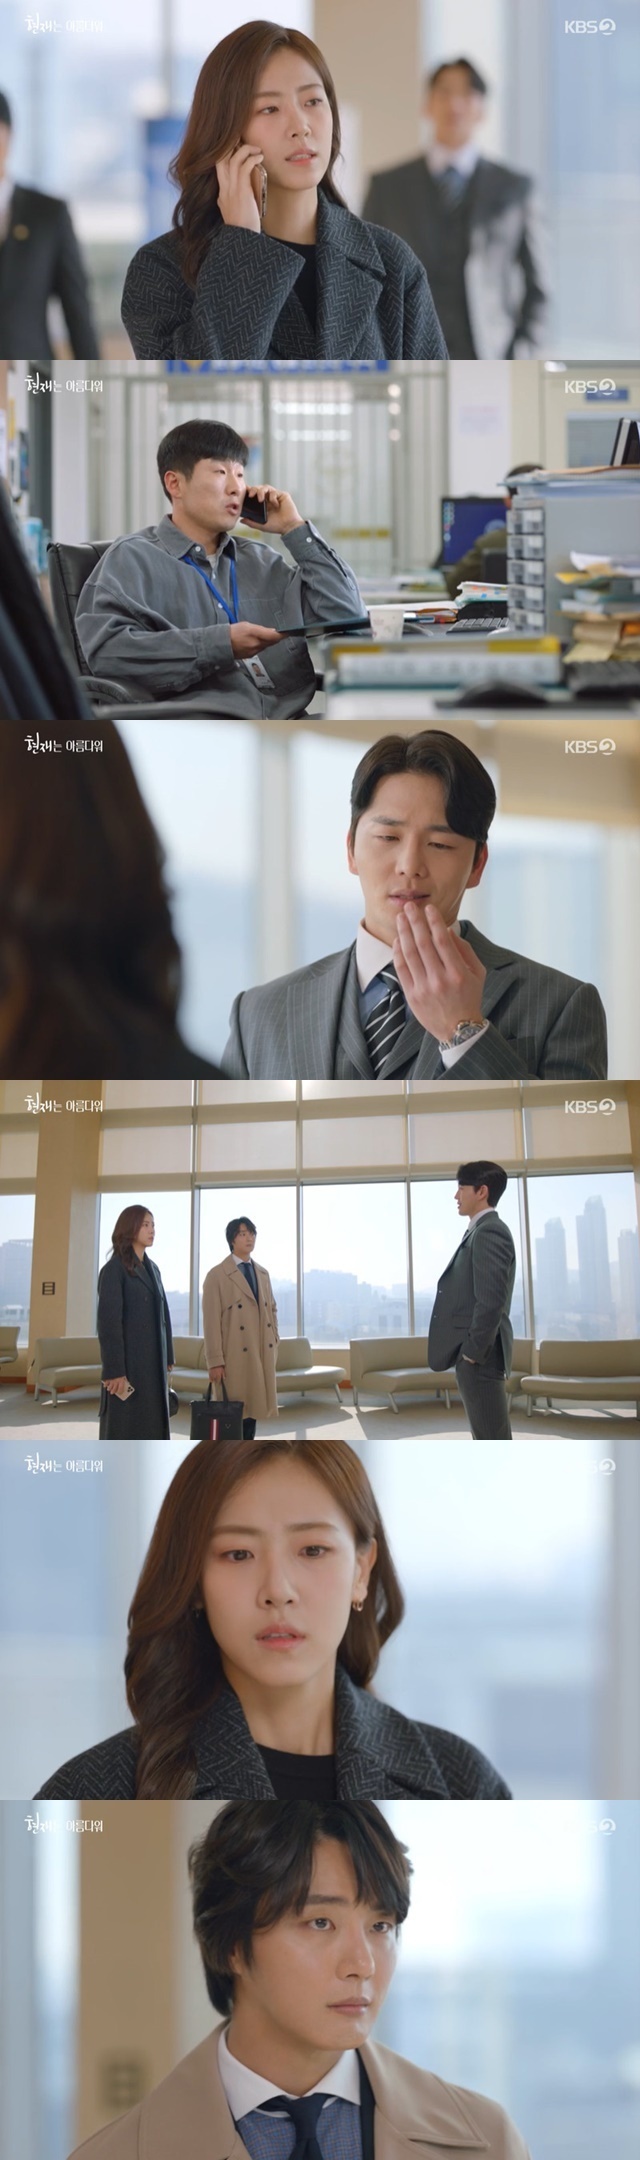 Lee Hyun-jin threatens Bae Da-bins marriage cancellation lawsuit with assault charges, counter-firesIn the 3rd KBS 2TV Weekend drama Its Beautiful Now (playplayplay by Ha Myung-hee/director Kim Sung-geun), which aired on April 9, the current Future (Bae Da-bin) was driven by assault after shaking off Joon Park (Lee Hyun-jin).Lee Min-ho (Park Sang-won) and Han Kyung-ae (Kim Hye-ok) proposed a marriage project to give three sons, Oh Min-seok, Lee Hyun-Jae (Yoon Shi-yoon), and Lee Soo-jae (seo beam-jun), to give apartments to those who bring in women to marriage within six months.Lee Soo-jae, who was in his 20s, was the first to enter the project to promote and sell Lee Hyun-Jae in his mid-to-late 30s, and reluctantly profit-making and Lee Hyun-Jae joined.The visual presenter, Bae Da-bin, was haunted by Leon Park (Lee Hyun-jin).Joon Park tore up the documents prepared by the current Future and expressed violence and was angry, Do you think you have all kinds of mischief to see this so far?My mother says you need to marriage her business, Joon Park said, but shes only three months away.Ill sell you half the apartment.The angry one shook off the gripping Joon Park and hit him with his handbag, and the embarrassed one bleeded.You know why Ive been avoiding you? I dont want to see my bottom. I dont want to see the bottom of my bottom!The current Future was comforted by drinking with his mother, Jin Soo-jung (Park Ji-young), and drunk drunk.Yoon Jeong-ja (Ban Hyo-jung) blamed his granddaughter Hyun Futures drinking spirit on his son Hyun Jin-heon (Byeon Woo-min) and his daughter-in-law Jin Soo-jung, while Hyun Jin-heon pinpointed the fact that his mother Yoon Jeong-ja had been in conflict with his daughter-in-law while living with his brother.Yoon Jung-ja insisted on living with his son, saying, Why do I go to a nursing home? Hyun Jin-heon noticed his wife Jin Soo-jung.Jin Soo Jung had his mother who adopted and raised him in the nursing home, and was dedicating to Shimo to bring his mother.Yoo Hye-young (Kim Ye-ryong) reasoned that the youngest child, Lee Soo-jae, is likely to go first when Han Kyung-ae (Kim He-ok) walked the apartment to marriage his sons.As he said, Lee Soo-jae was the most advanced, planning to attract Yuna (Choi Ye-bin) who is albaha.At the same time, Shim Hae-joon (Shin Dong-mi), the representative of Lee Hyun-Jaes law firm, went to the dentist of professional-making and foreshadowed the romance with professional-making.The current Future bought a wife gift to thank Lee Hyun-Jae, a lawyer who had filed a lawsuit against Joon Park, and Lee Hyun-Jae said, My wife can not receive a gift.I am not married, and I am embarrassed to know that Lee Hyun-Jae is not married.You dont want to marriage for the rest of your life, and then give it to him.Shim Hae-joon asked Lee Hyun-Jae for his brothers professional-making phone number, but Lee Hyun-Jae, who did not notice, could not imagine that Shim Hae-joon had a favorable feeling for his brothers professional-making.Profit-making also joined the blind date application without noticing his phone number to Shim Hae-jun, who offered 30 million won for a fake bride, but Yuna refused.But then I hurt my wrist while working part-time.